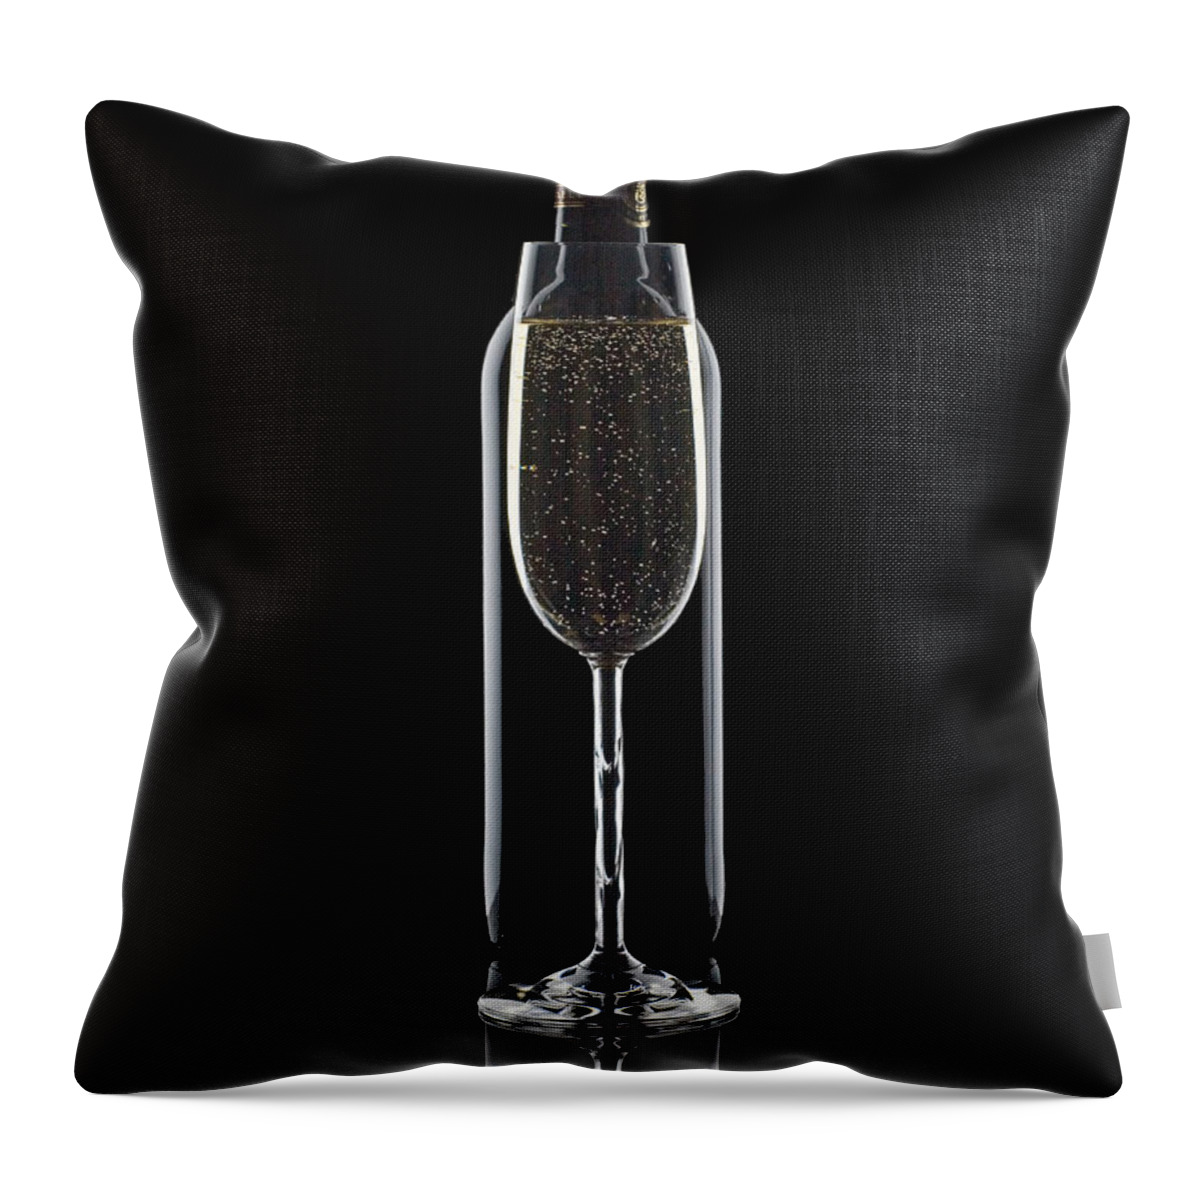 Wine Throw Pillow featuring the photograph Wine by Tom Mc Nemar